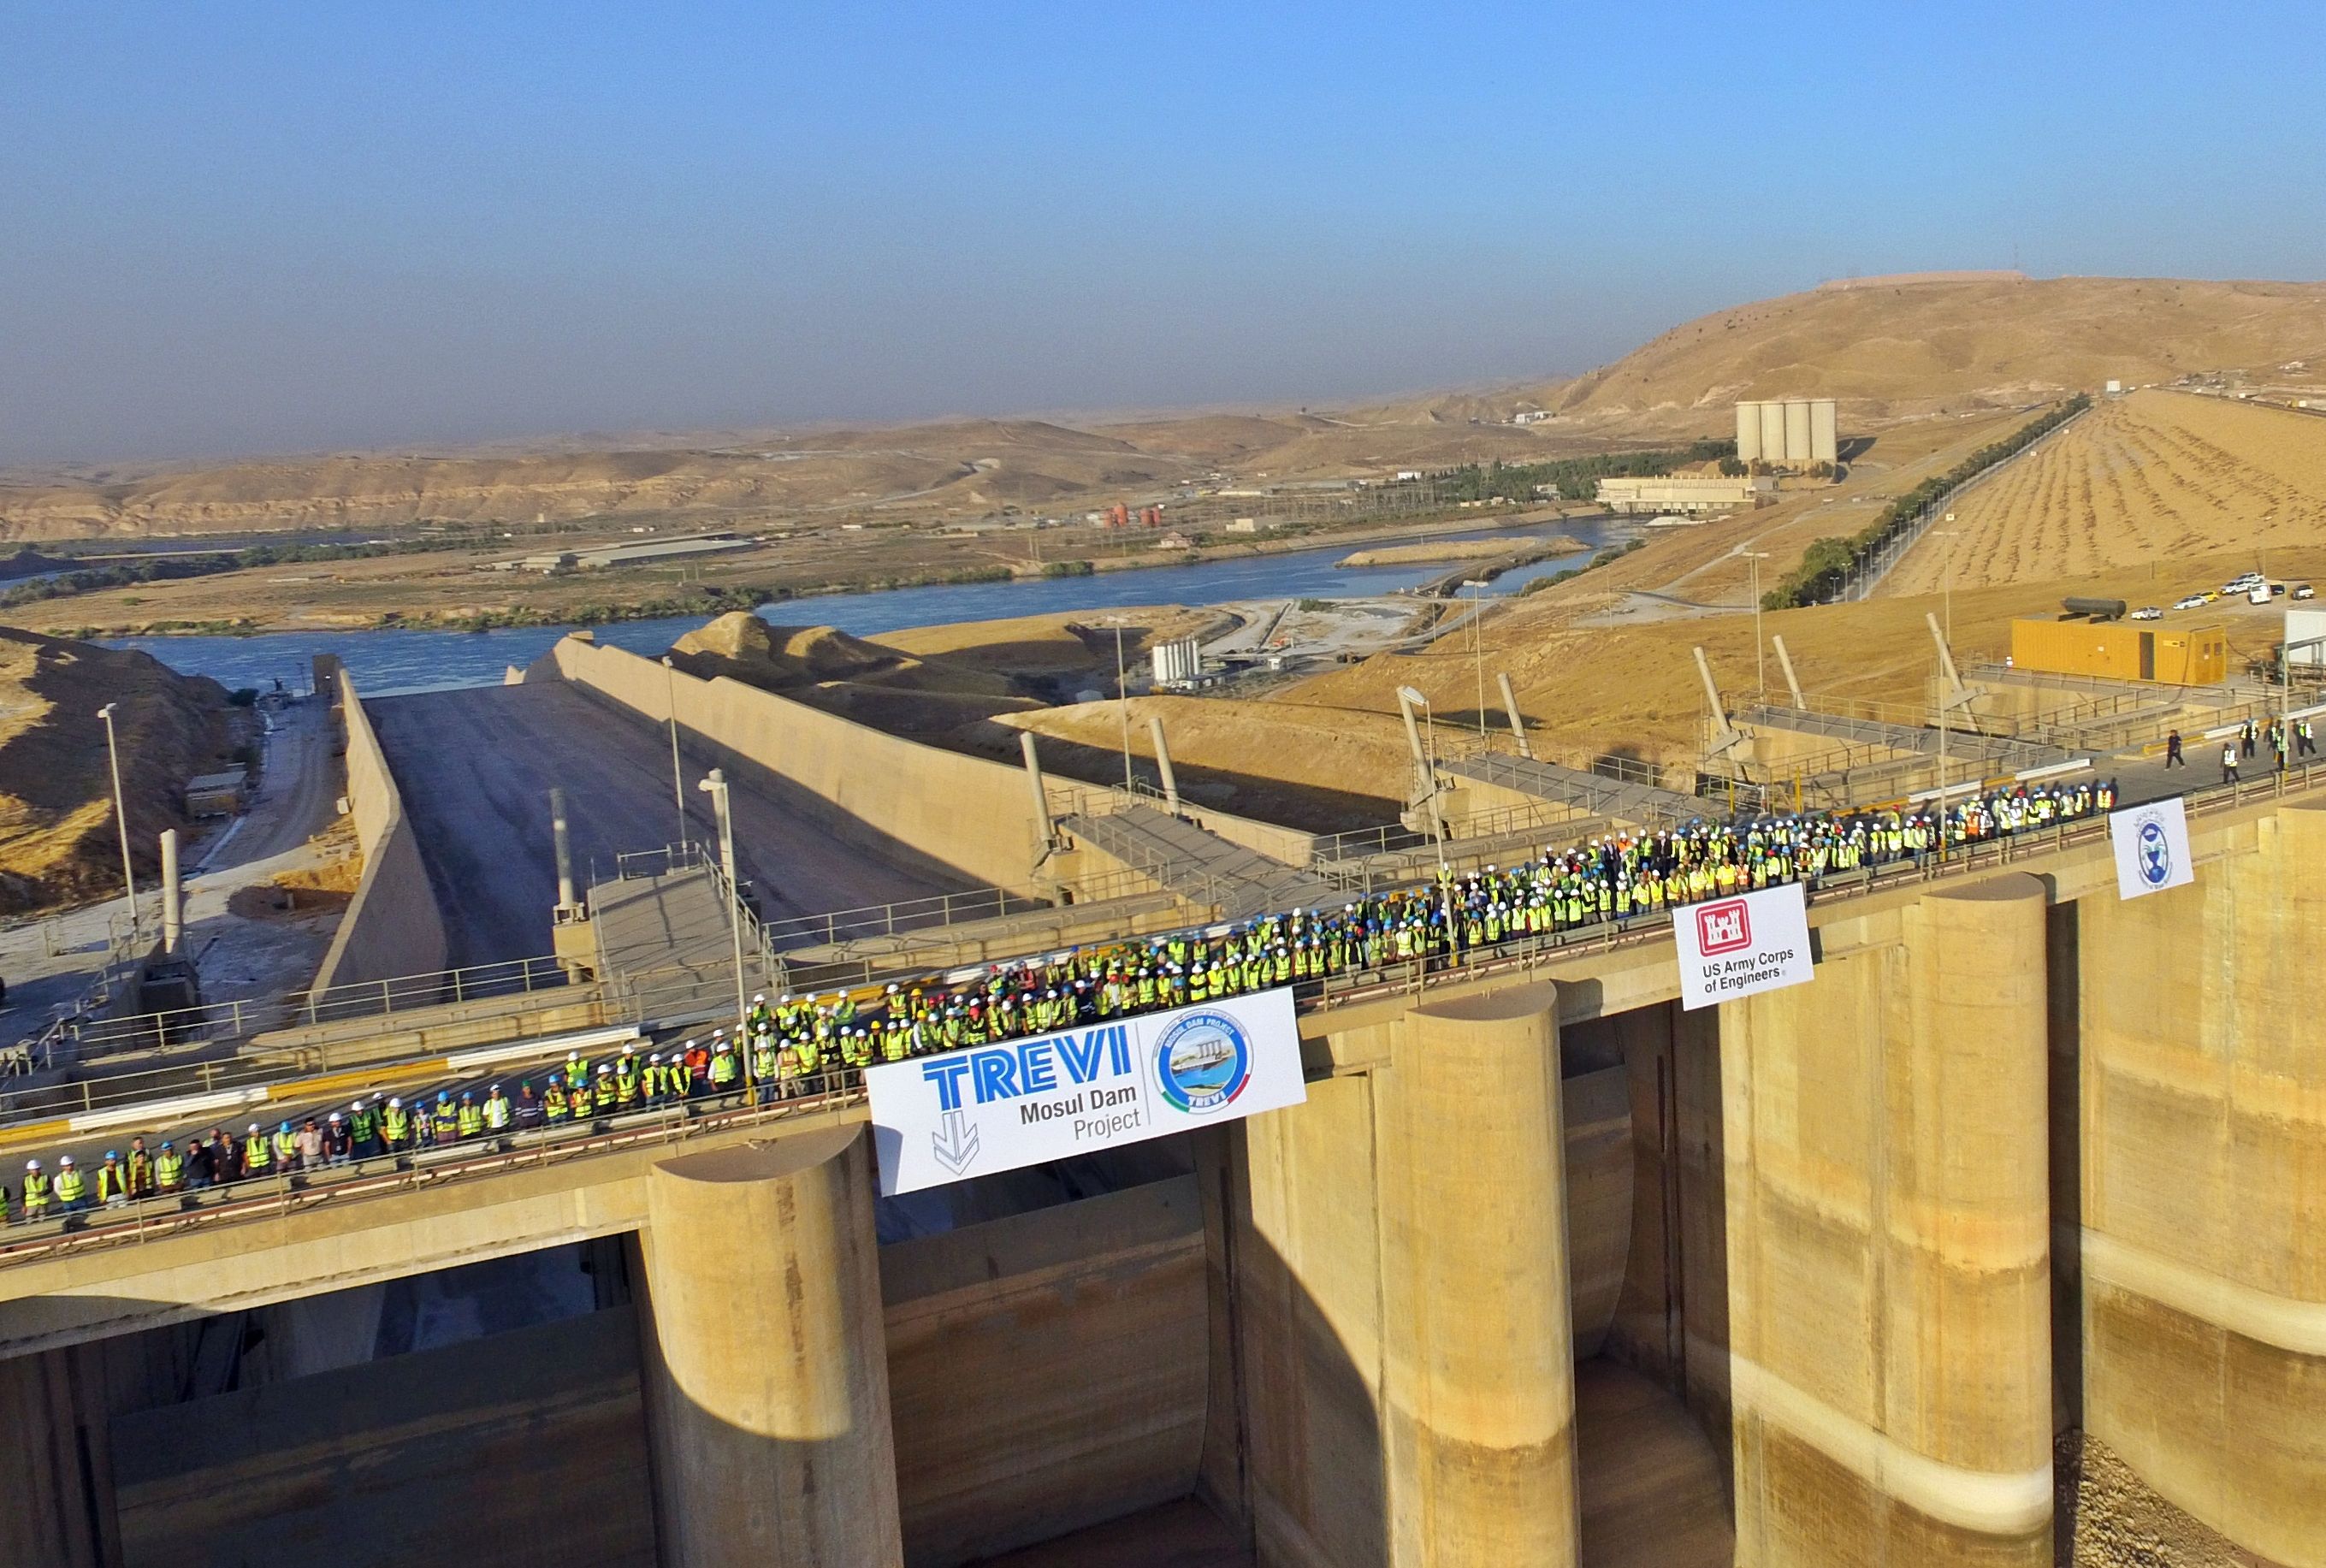 DFI Announces 2022 Outstanding Project Award Winner Mosul Dam Rehabilitation Project by Trevi